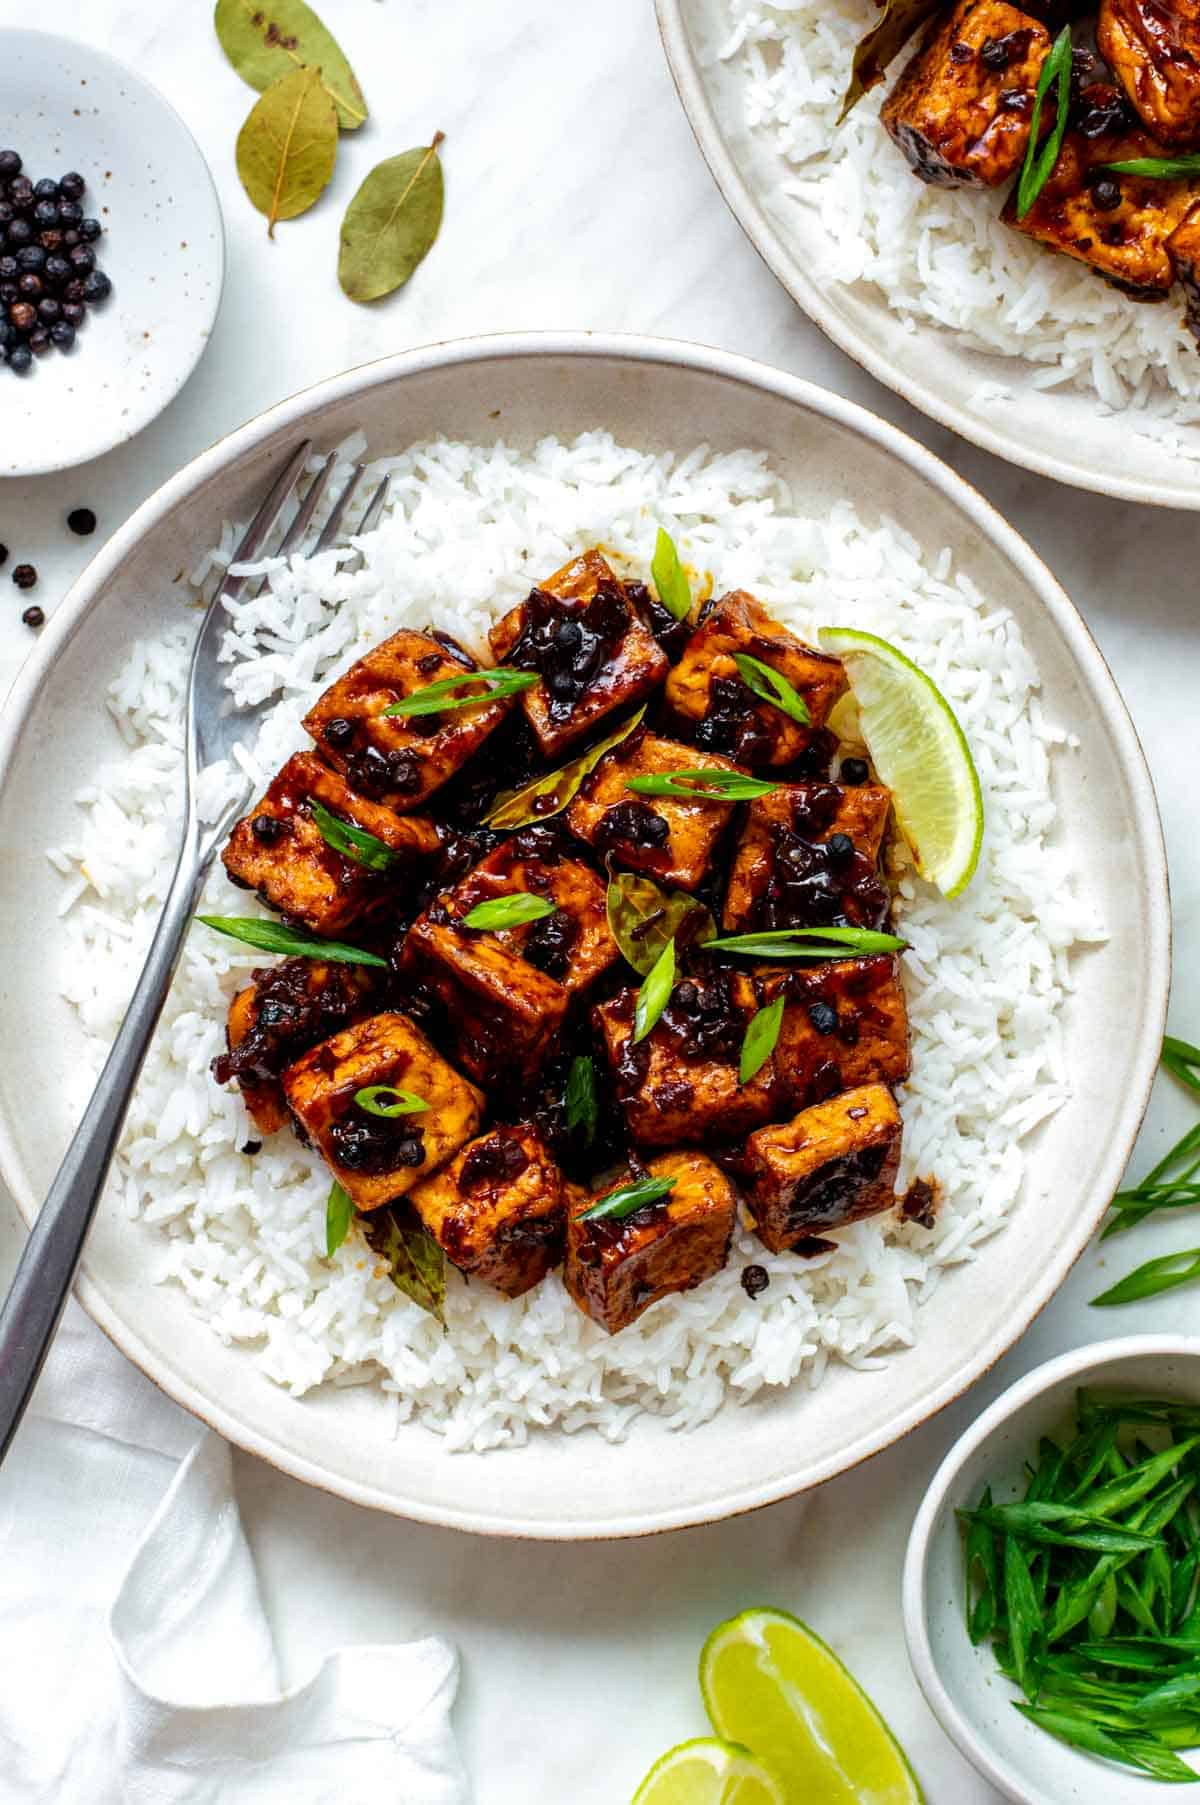 Tofu adobo served over a bed of rice and topped with sliced green onion.